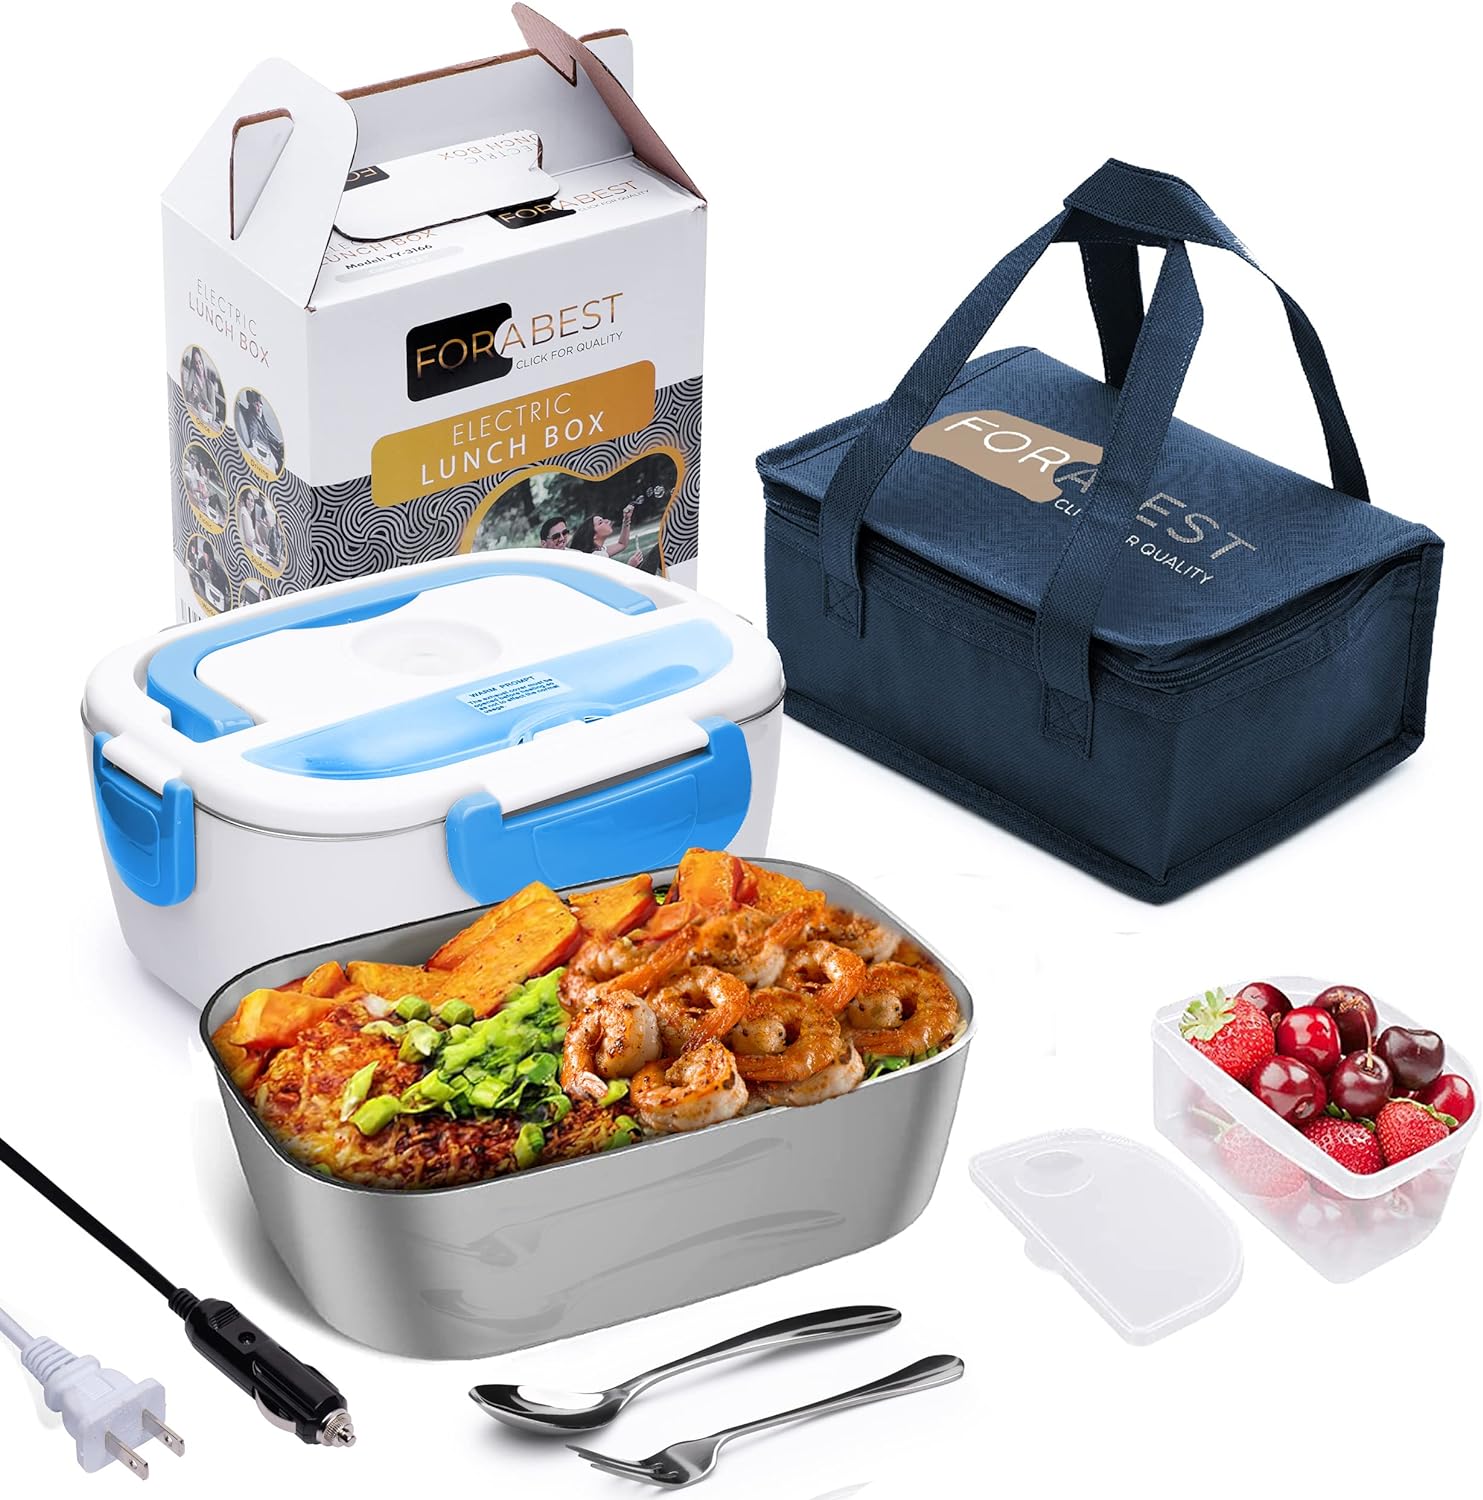 FORABEST Electric Lunch Box 3 in 1 Portable Food Warmer